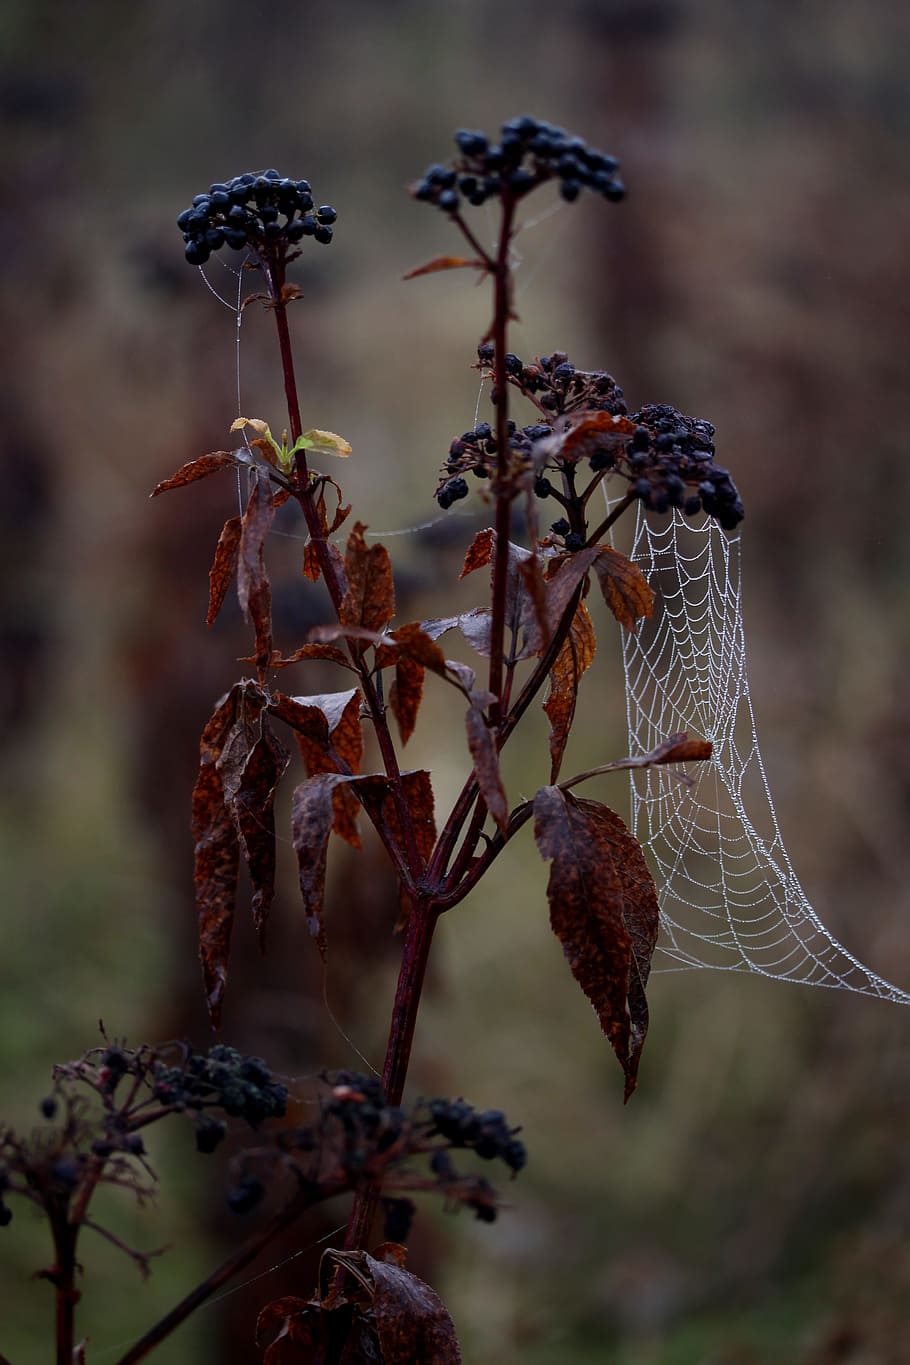 spider web, wet, hooked, place, dew, drops, nature, focus on foreground, plant, close-up